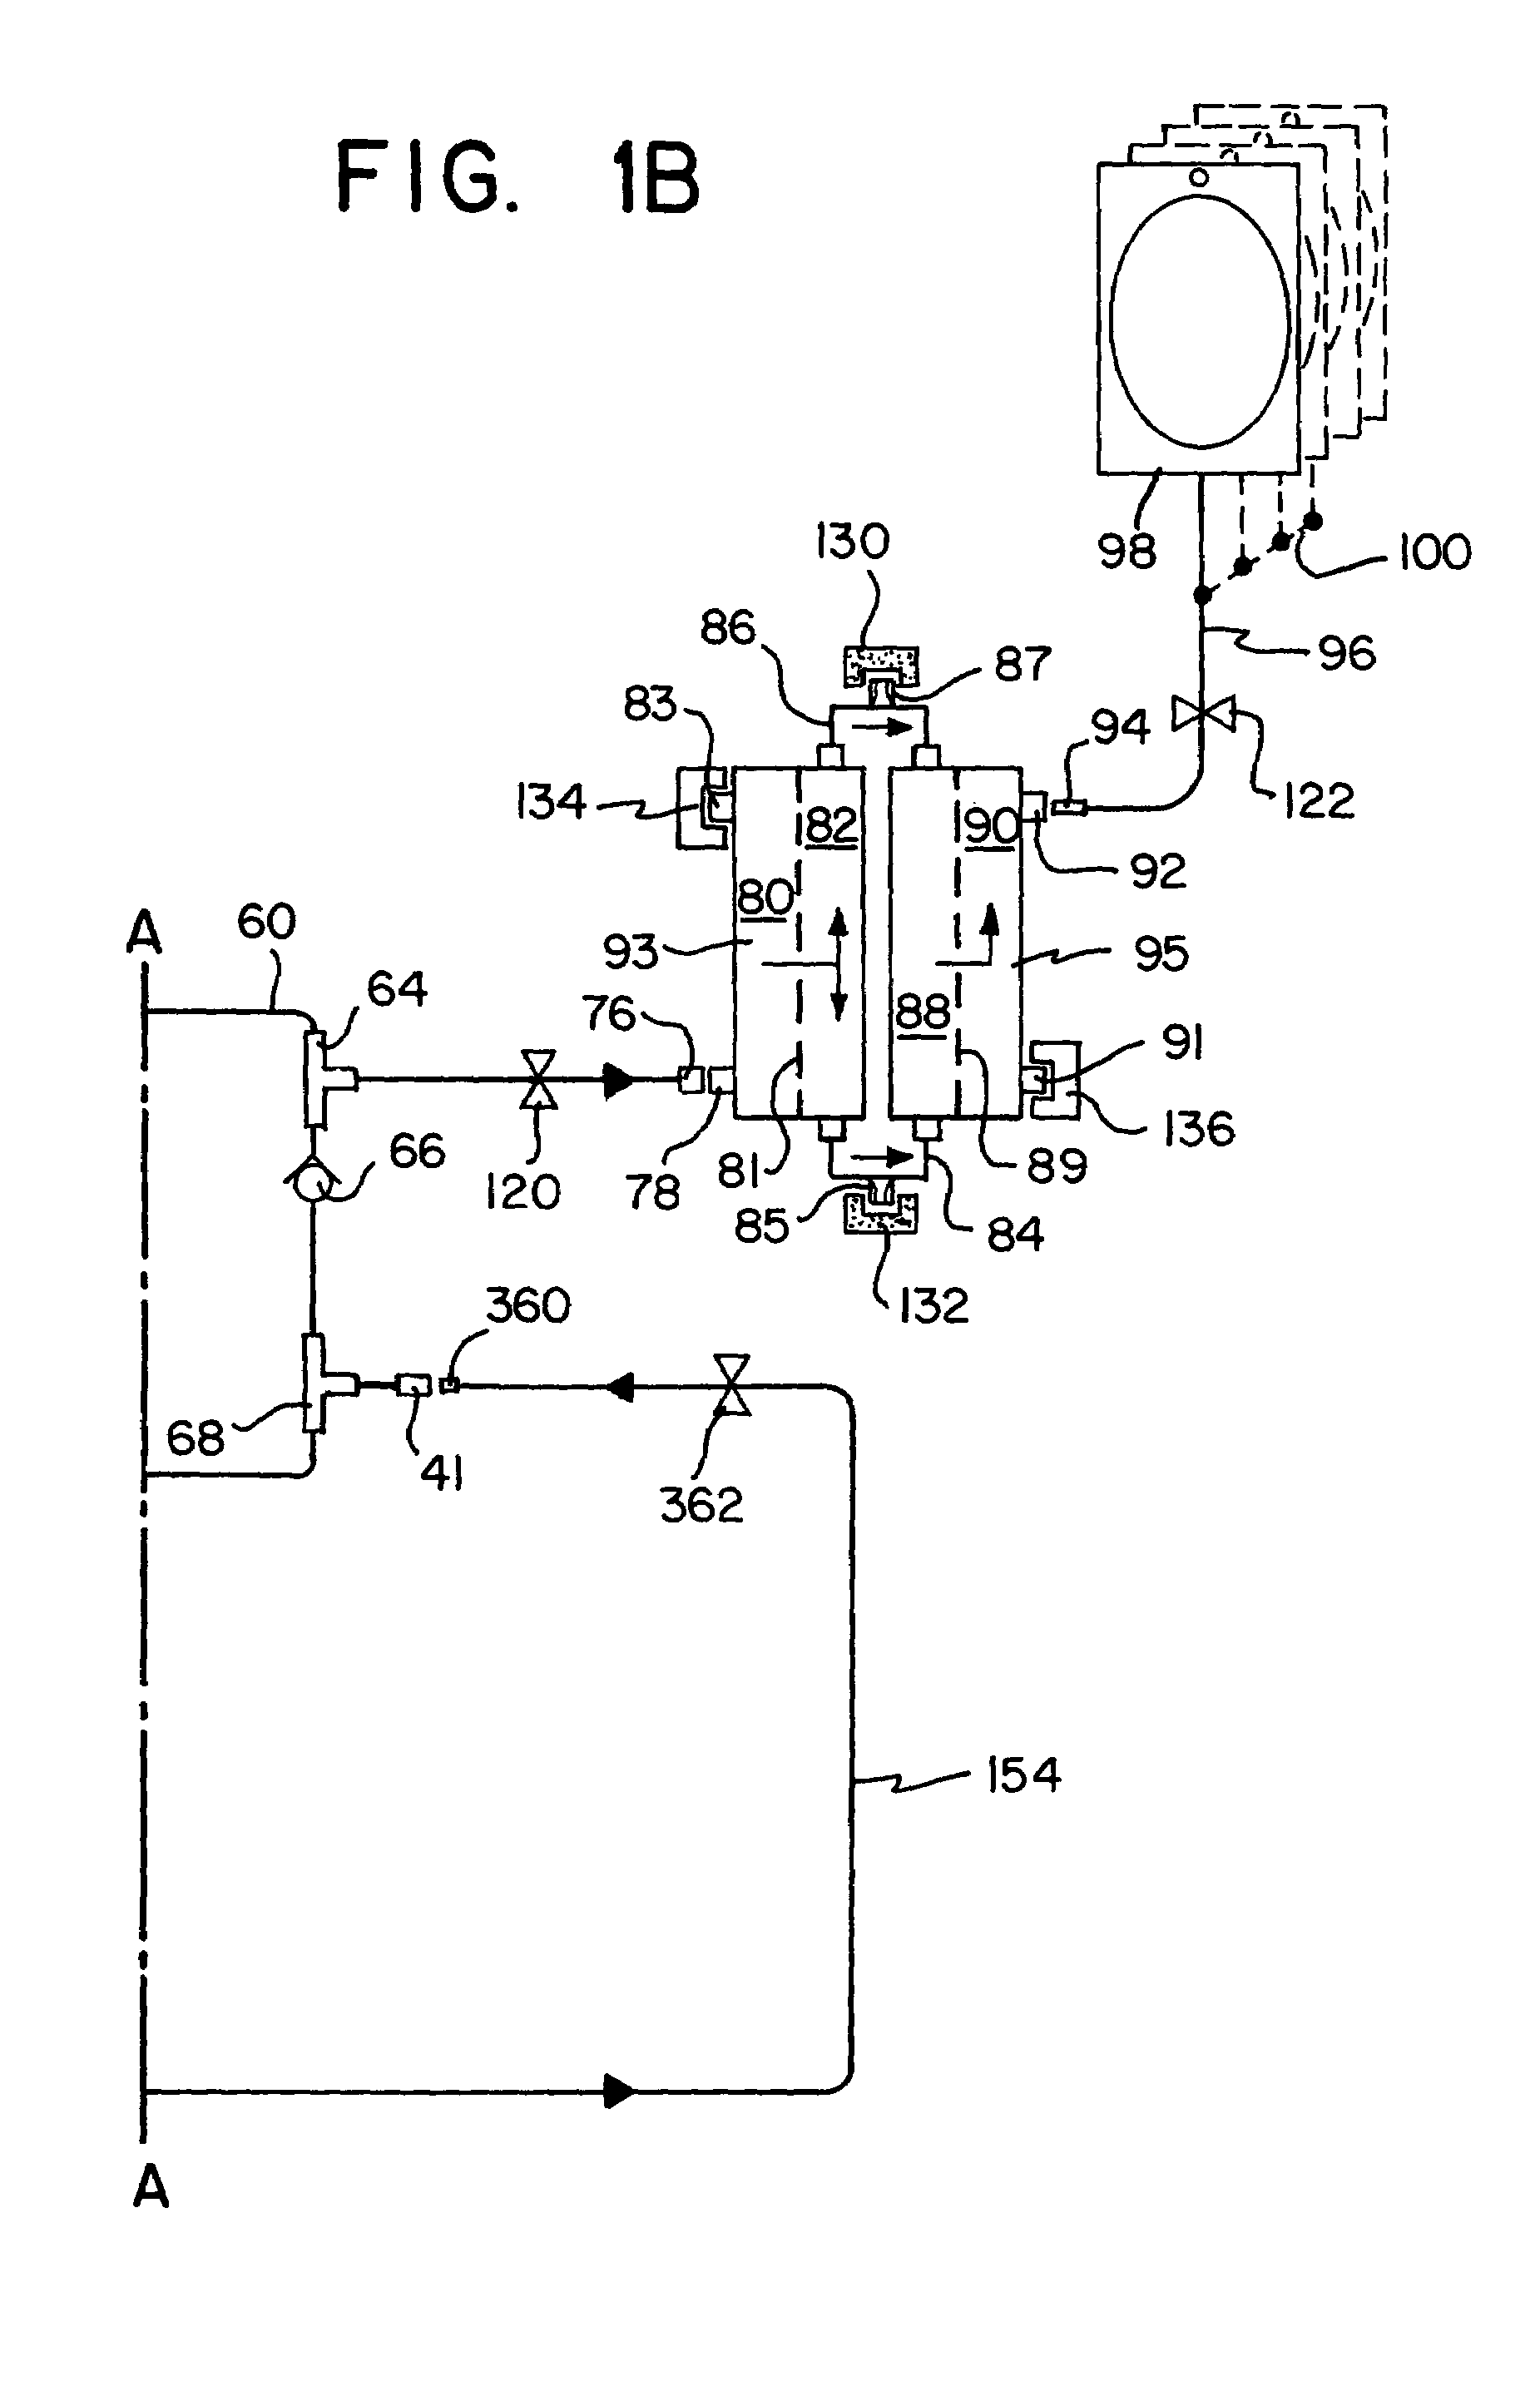 Method and apparatus for generating a sterile infusion fluid